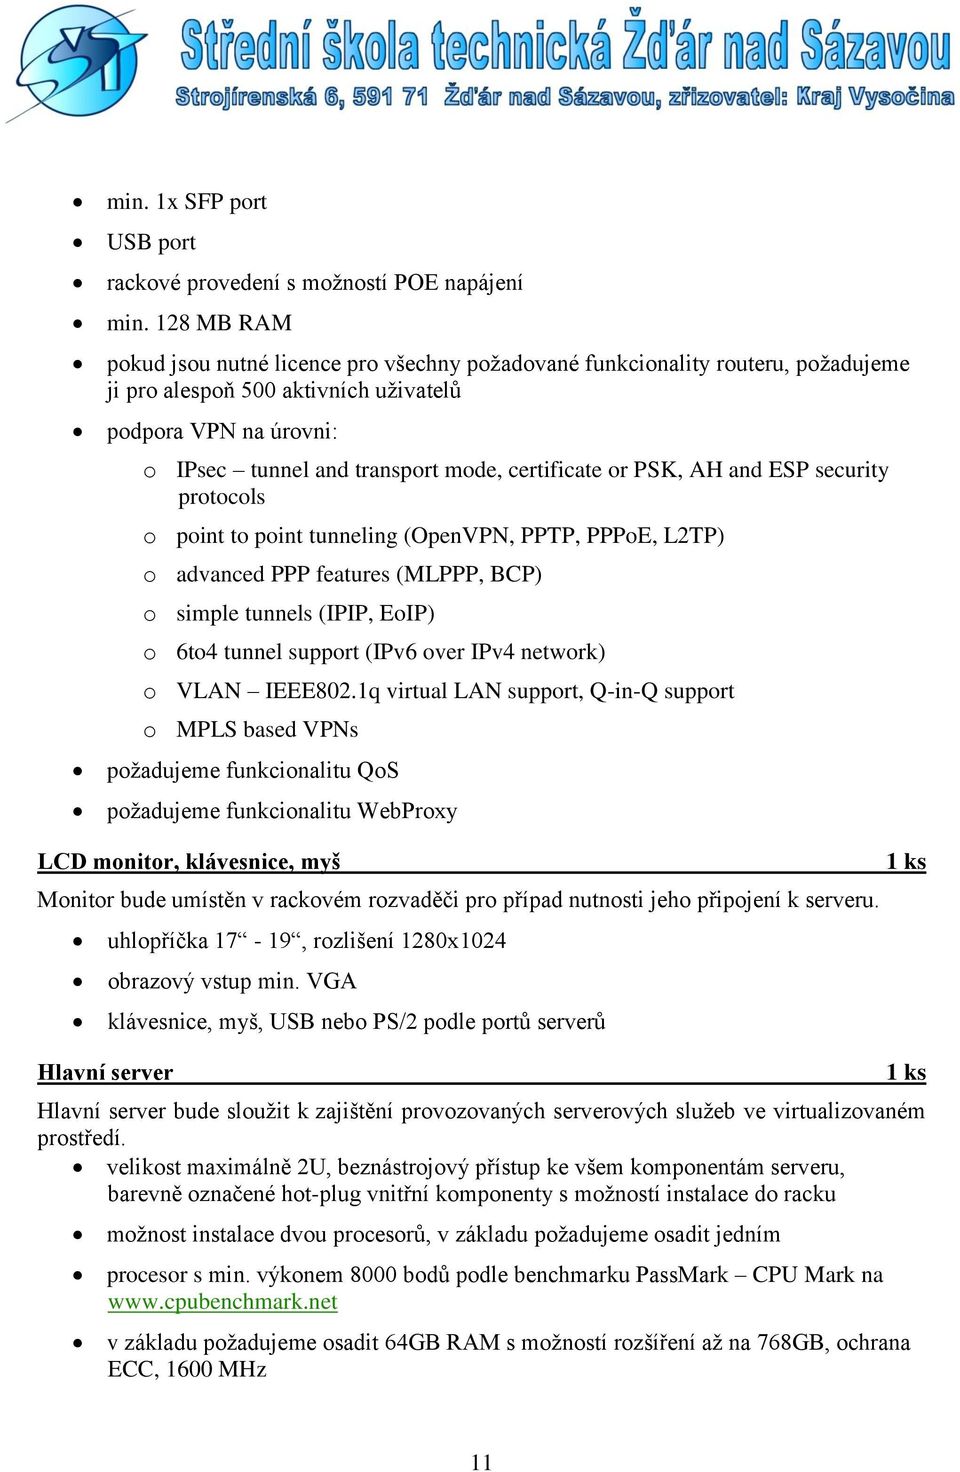 certificate or PSK, AH and ESP security protocols o point to point tunneling (OpenVPN, PPTP, PPPoE, L2TP) o advanced PPP features (MLPPP, BCP) o simple tunnels (IPIP, EoIP) o 6to4 tunnel support